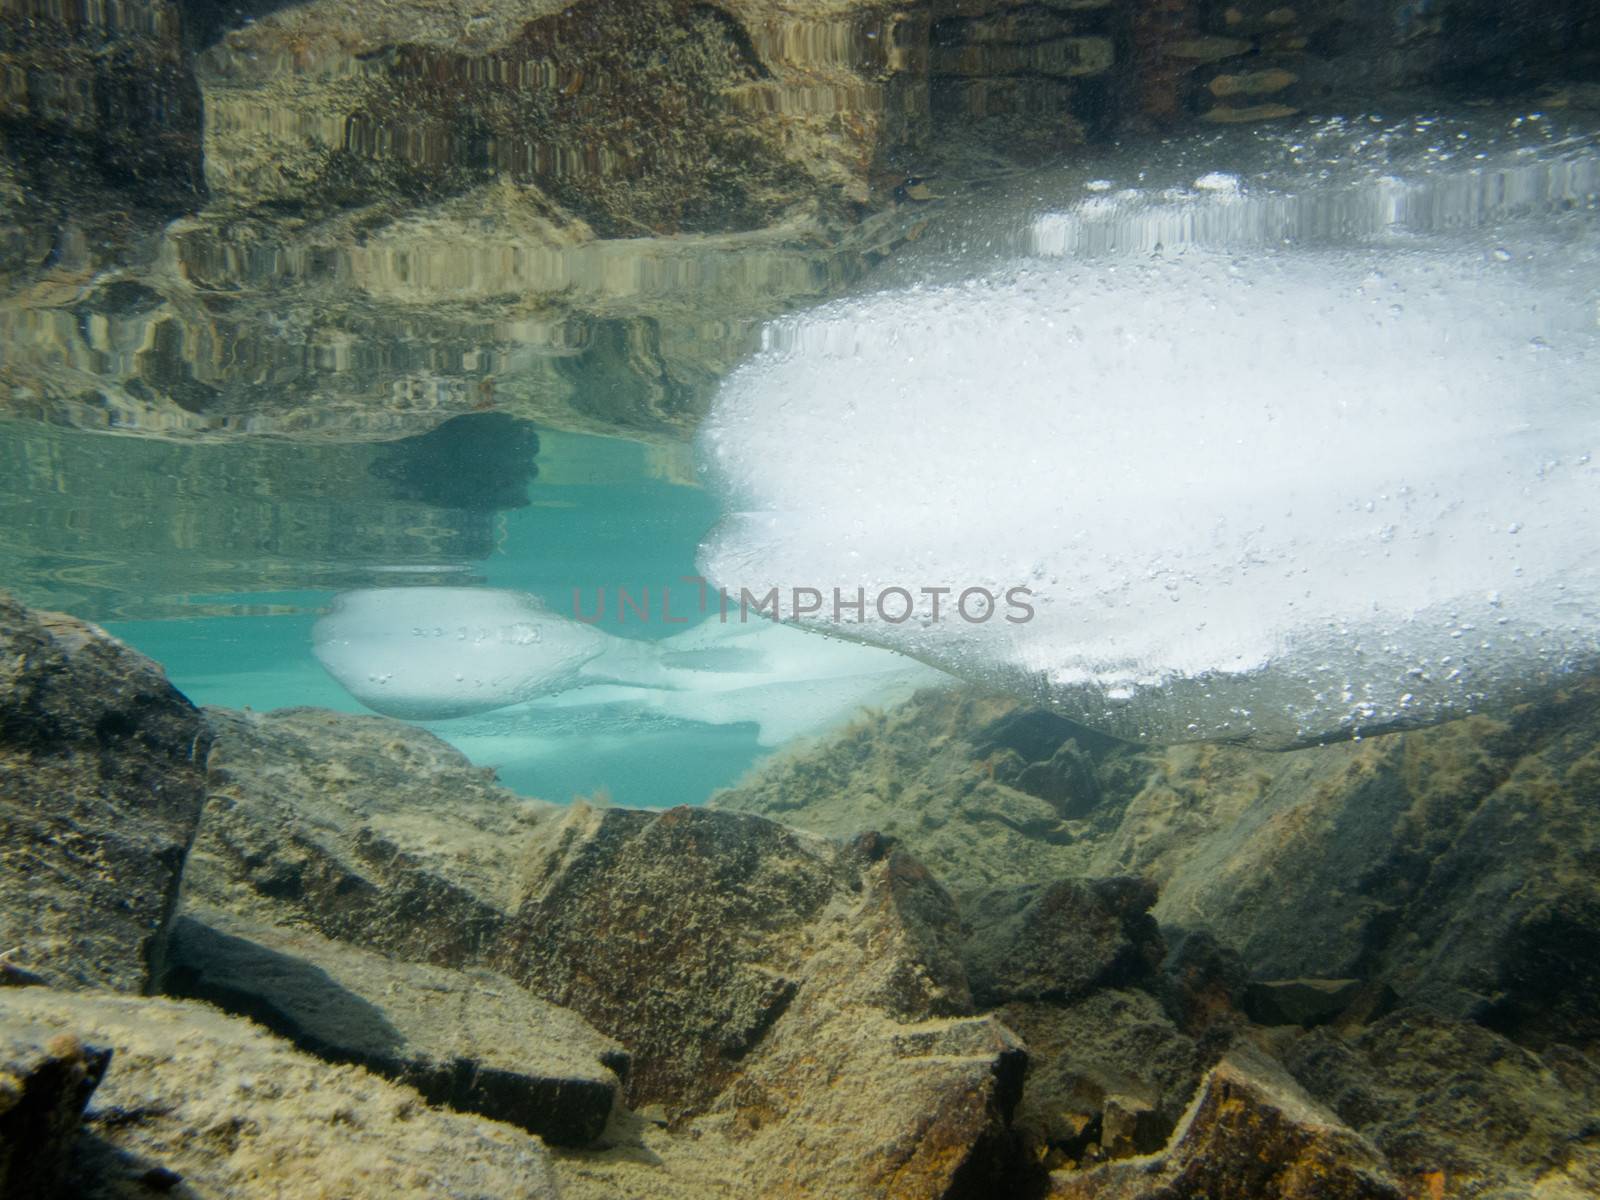 Underwater shot of ice floes floating in clear shallow water with rocky bottom mirrored on water surface